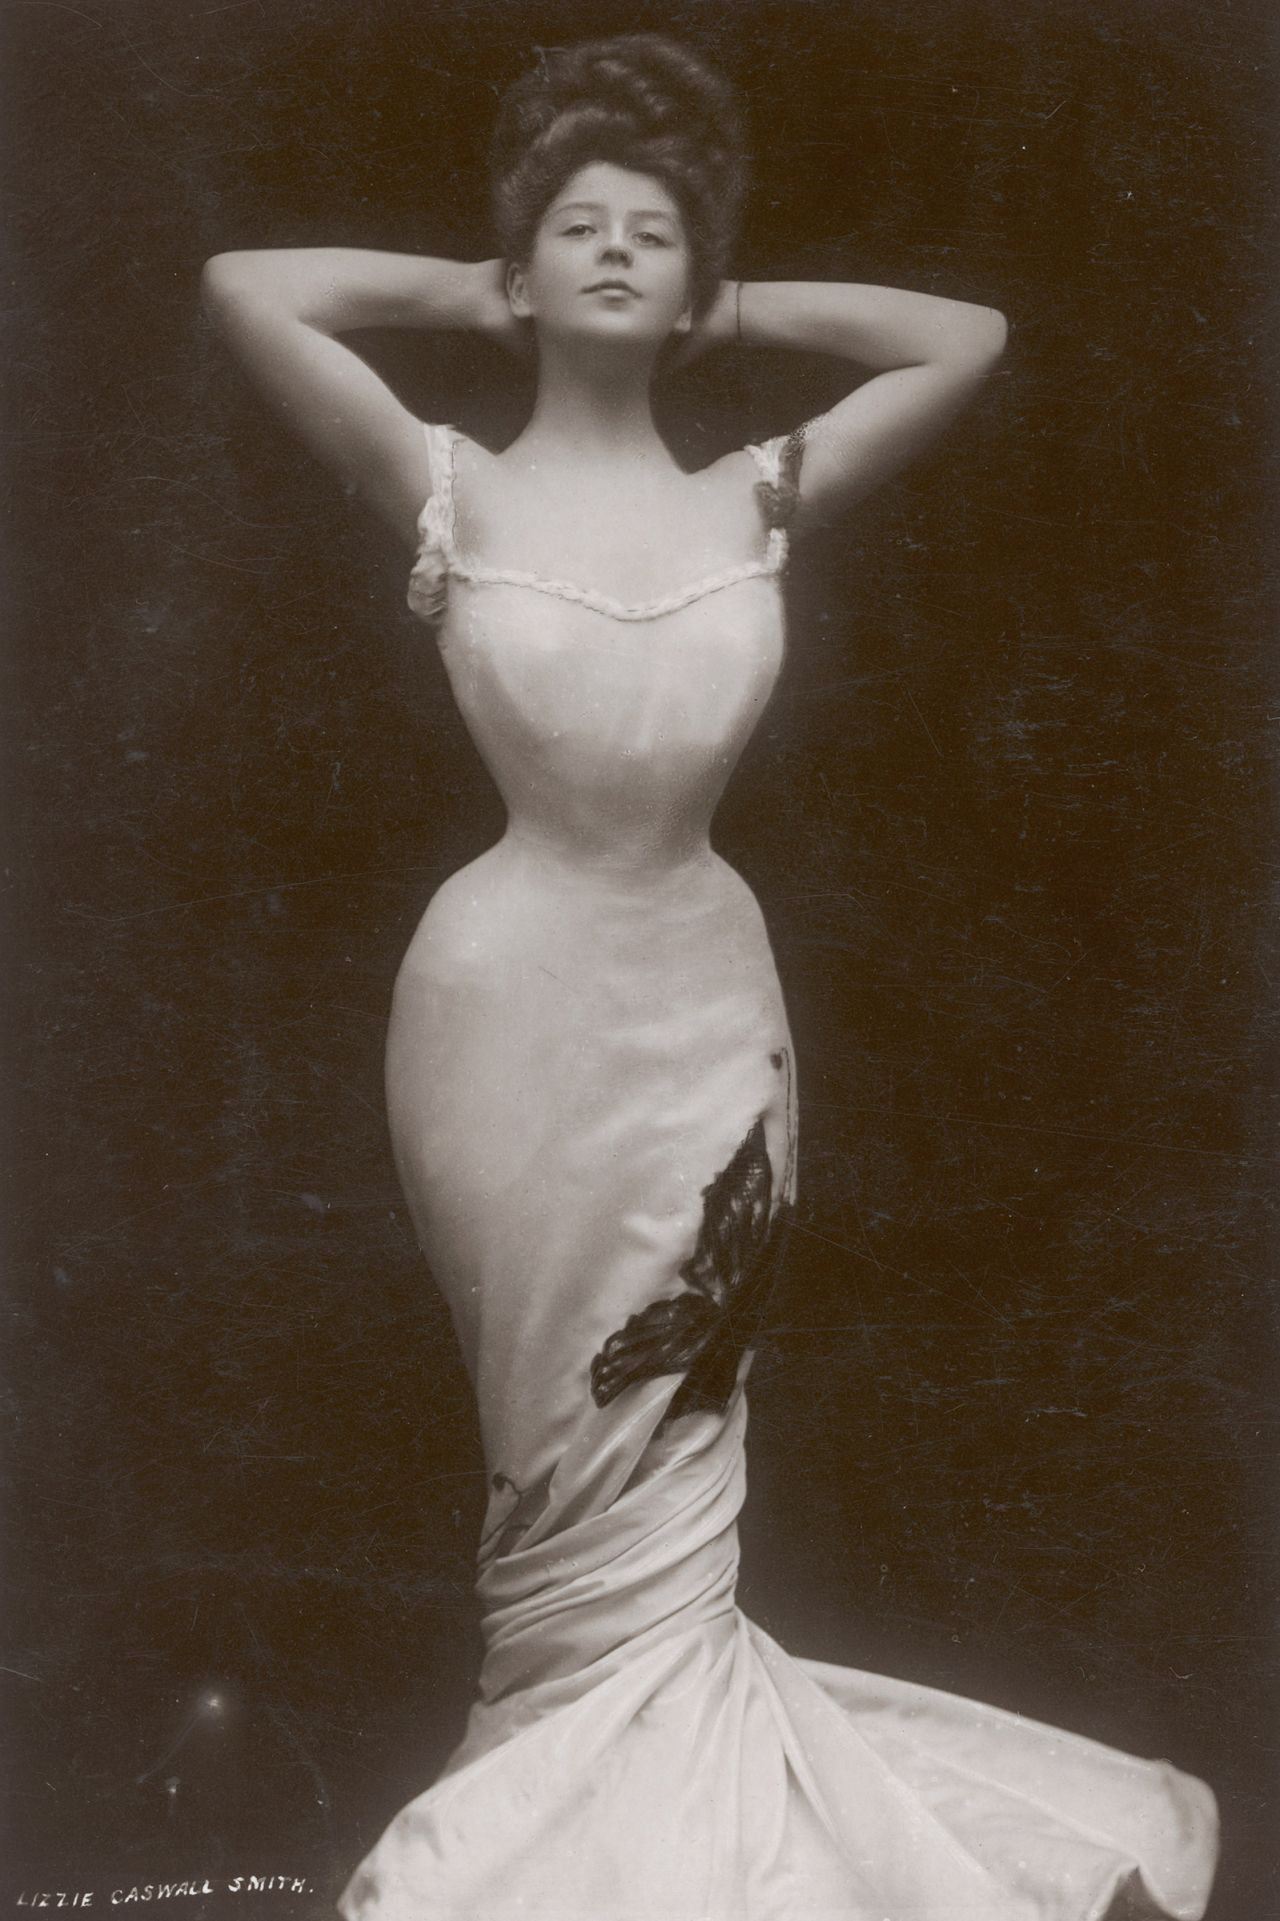 Actress Camille Clifford poses in a circa-1906 photo, wearing a white fishtail gown with a tightly-cinched waist.